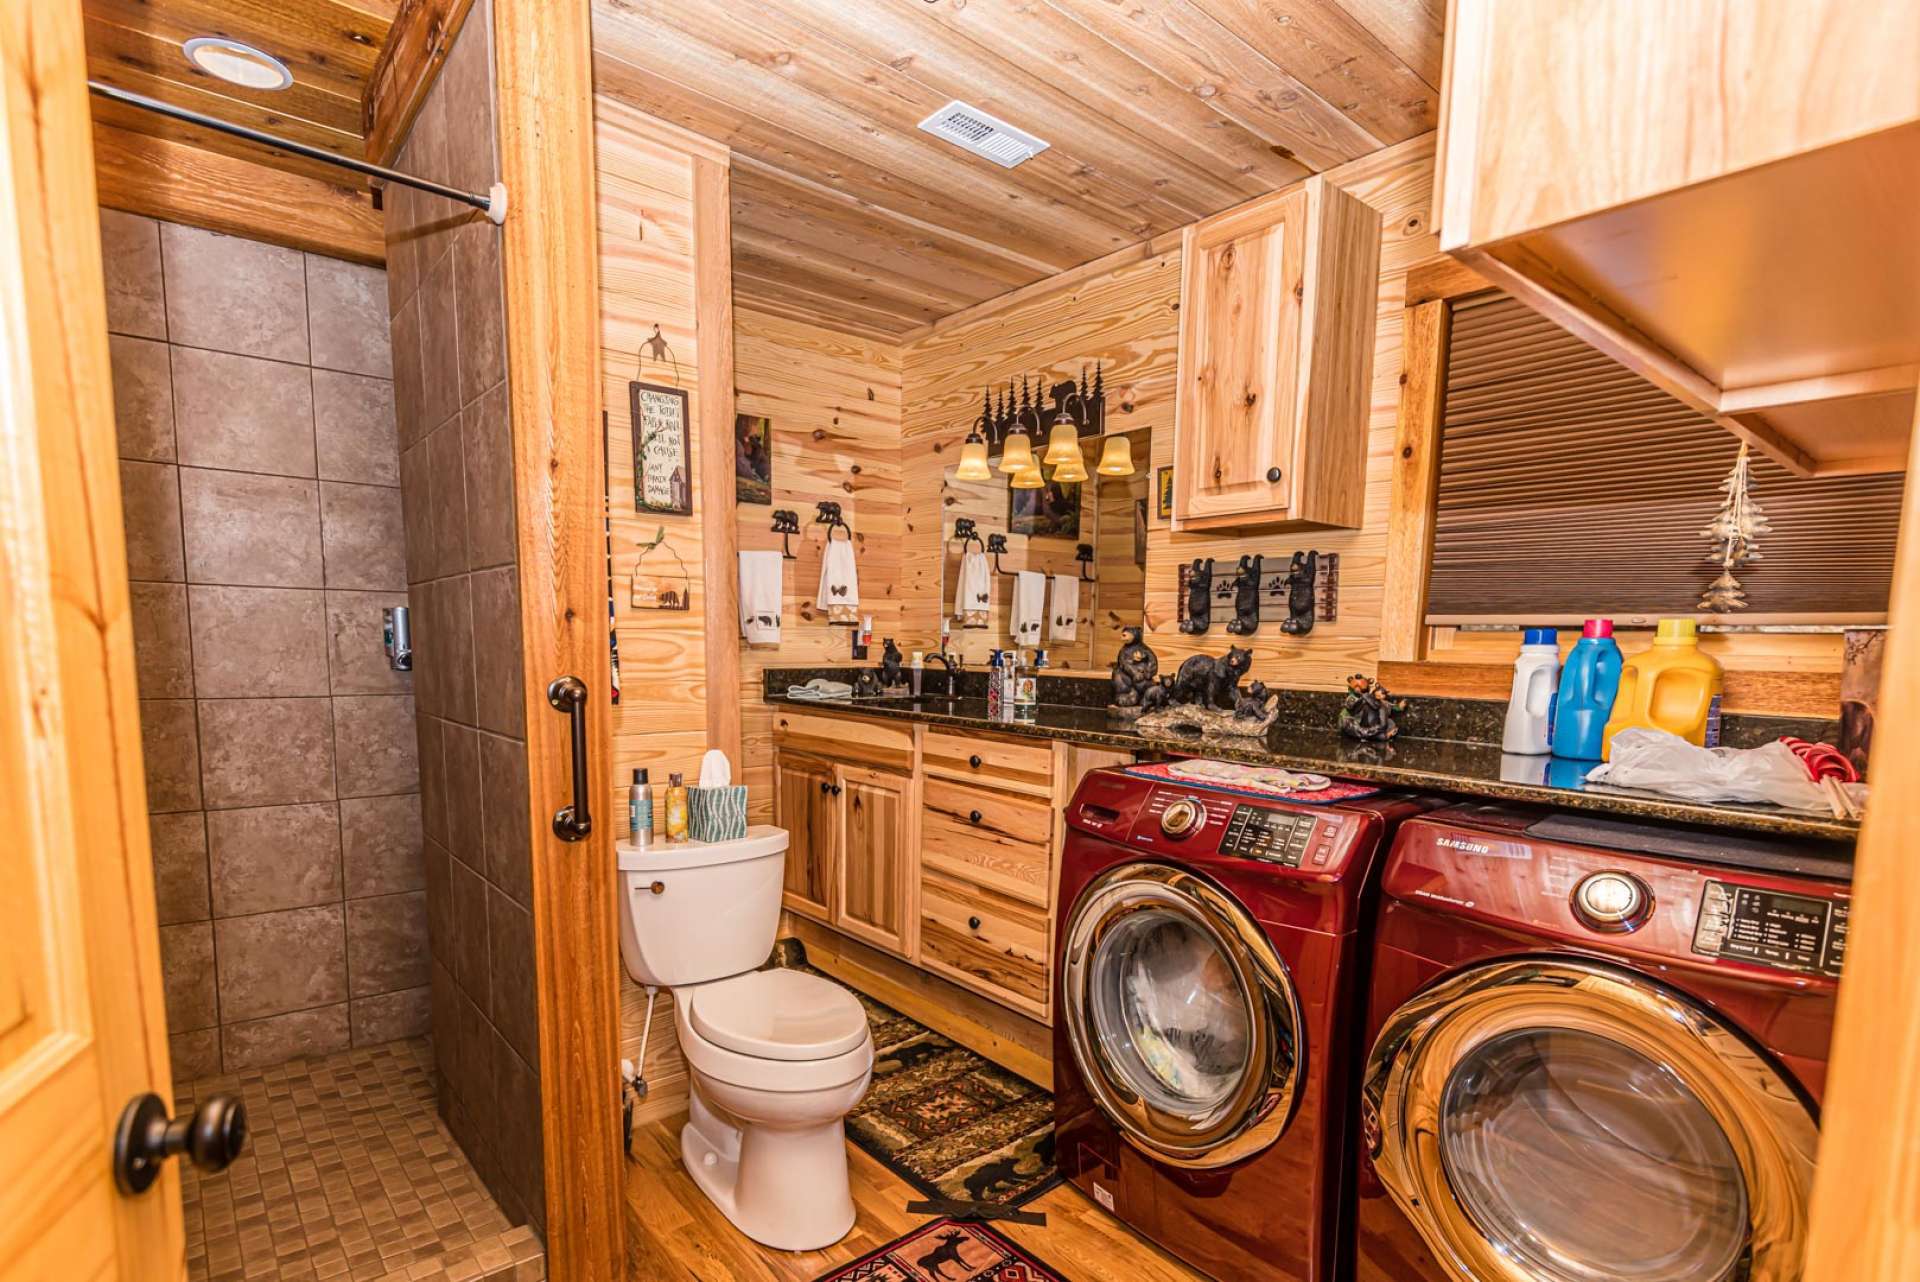 A full bath with laundry area completes the main level.